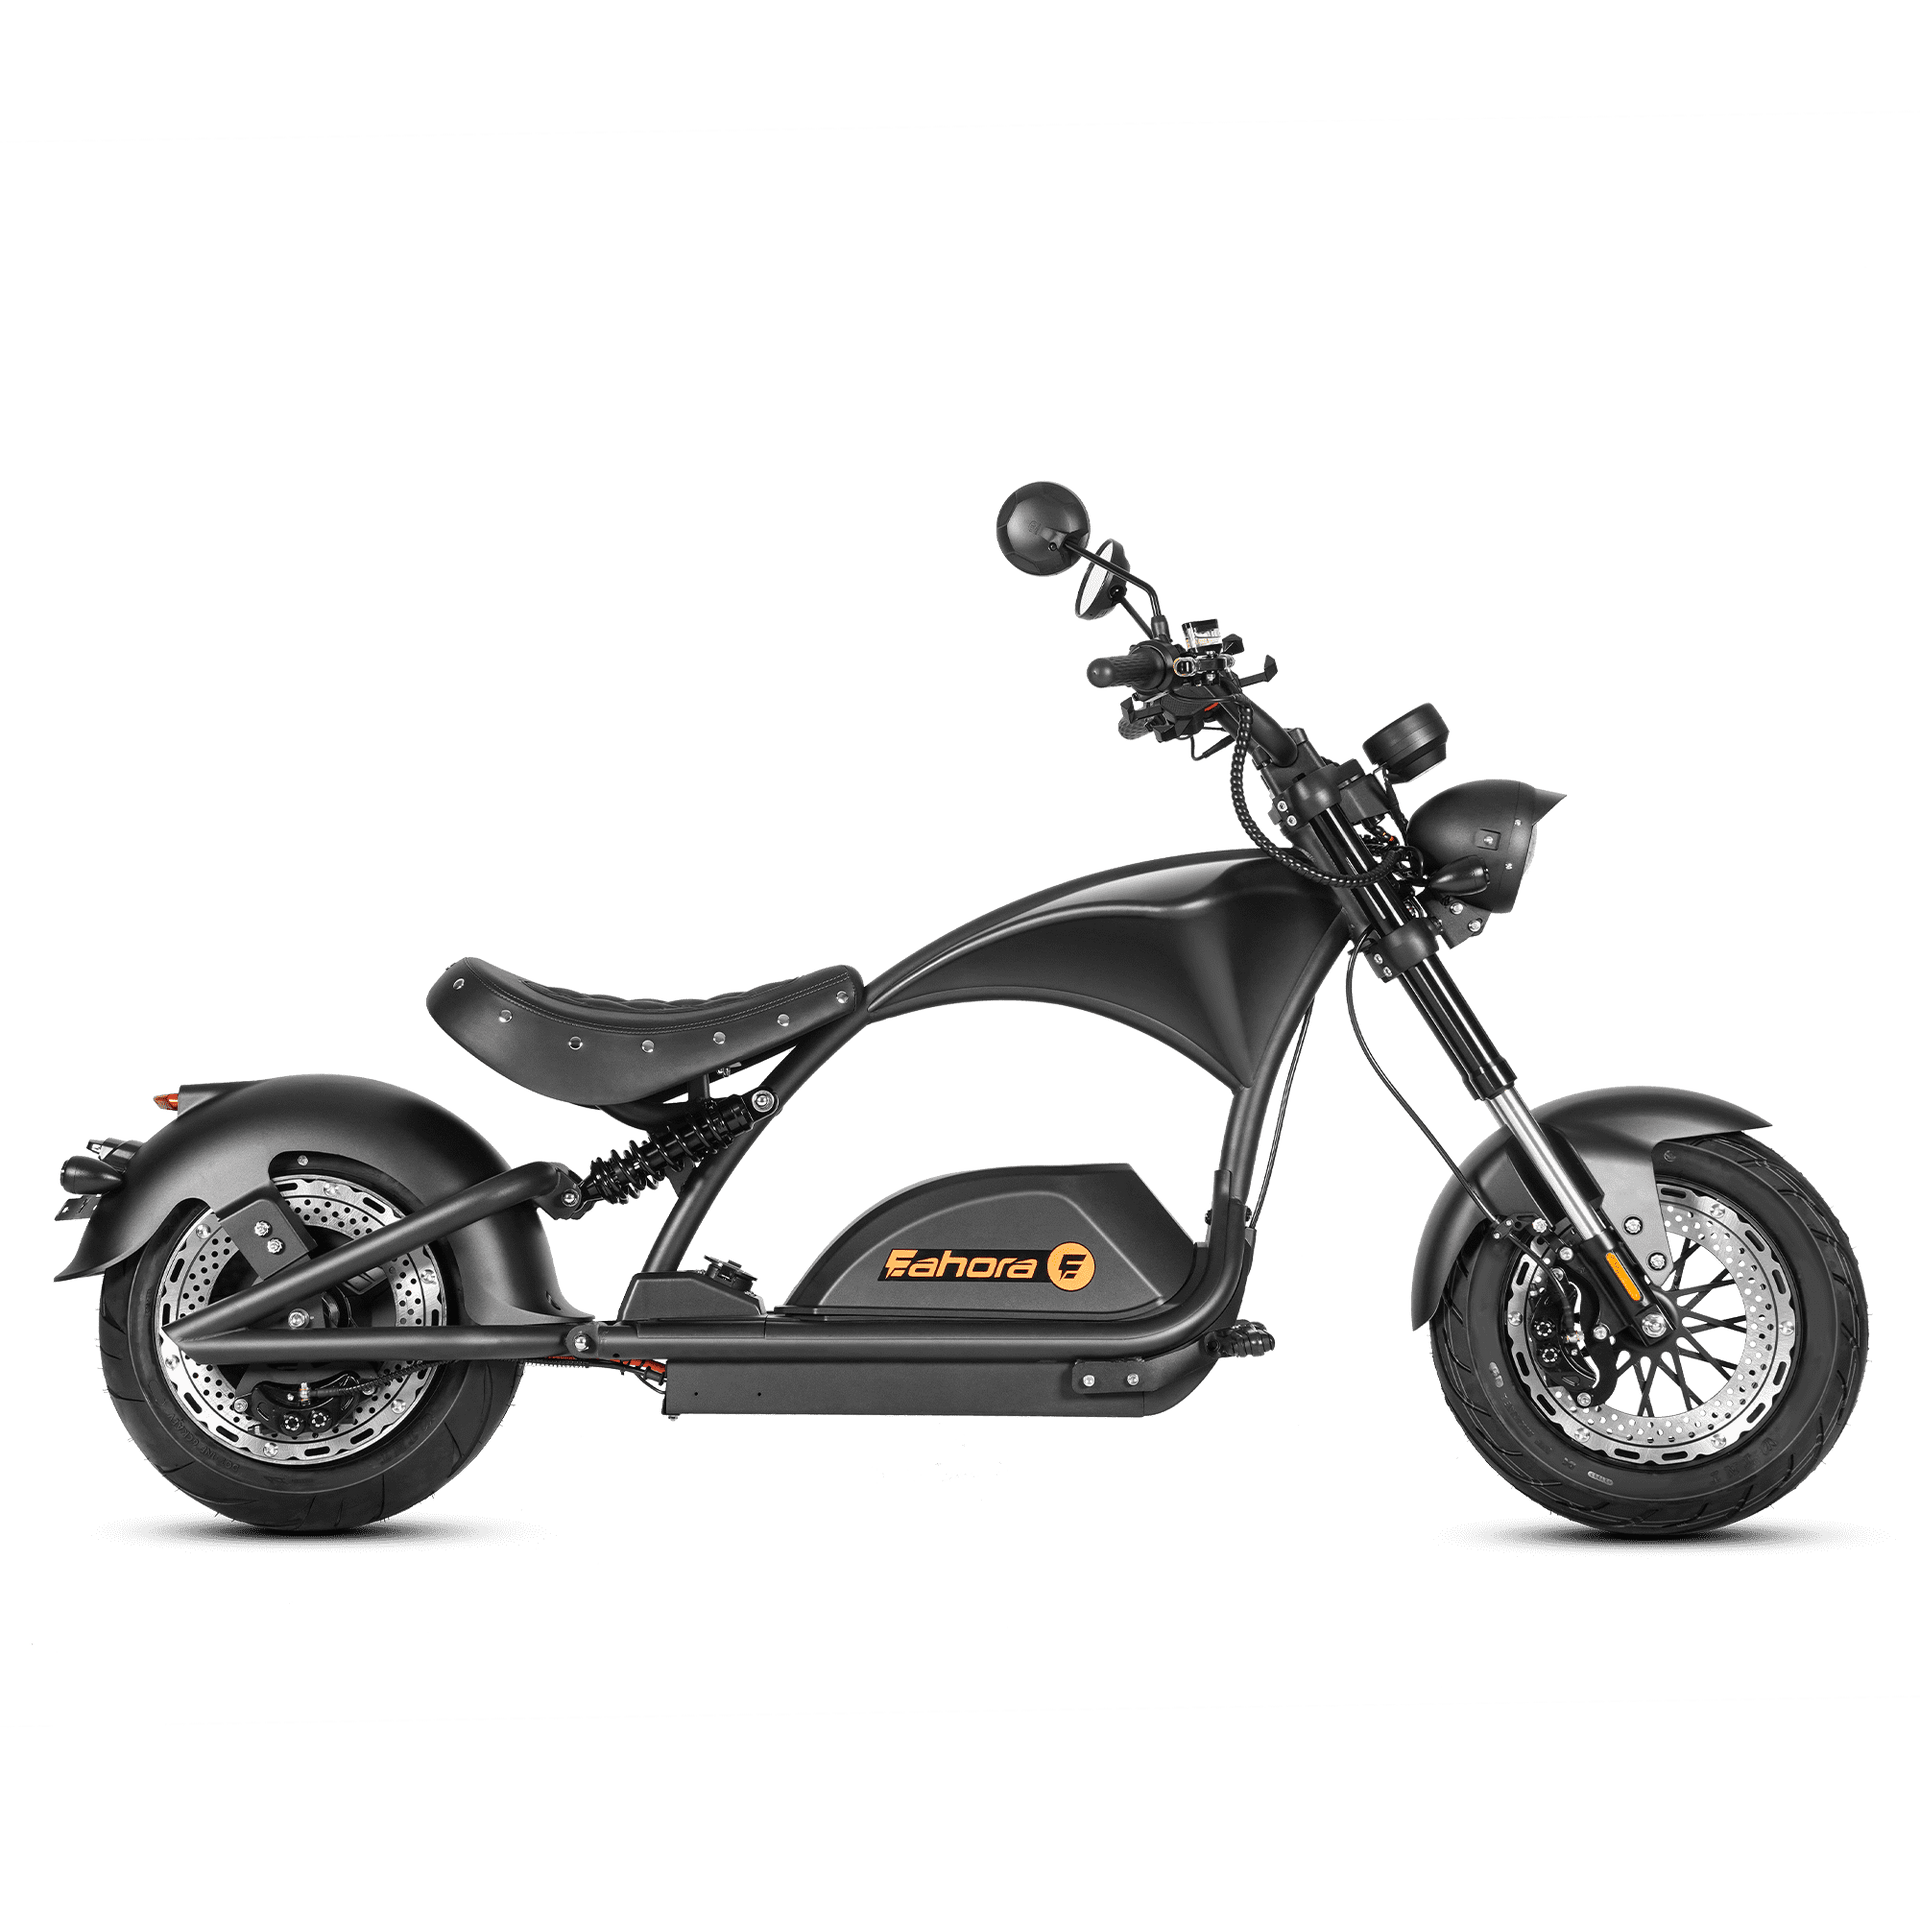 4000W Fat Tire Electric Scooter Chopper - Eahora Knight M1PS Black